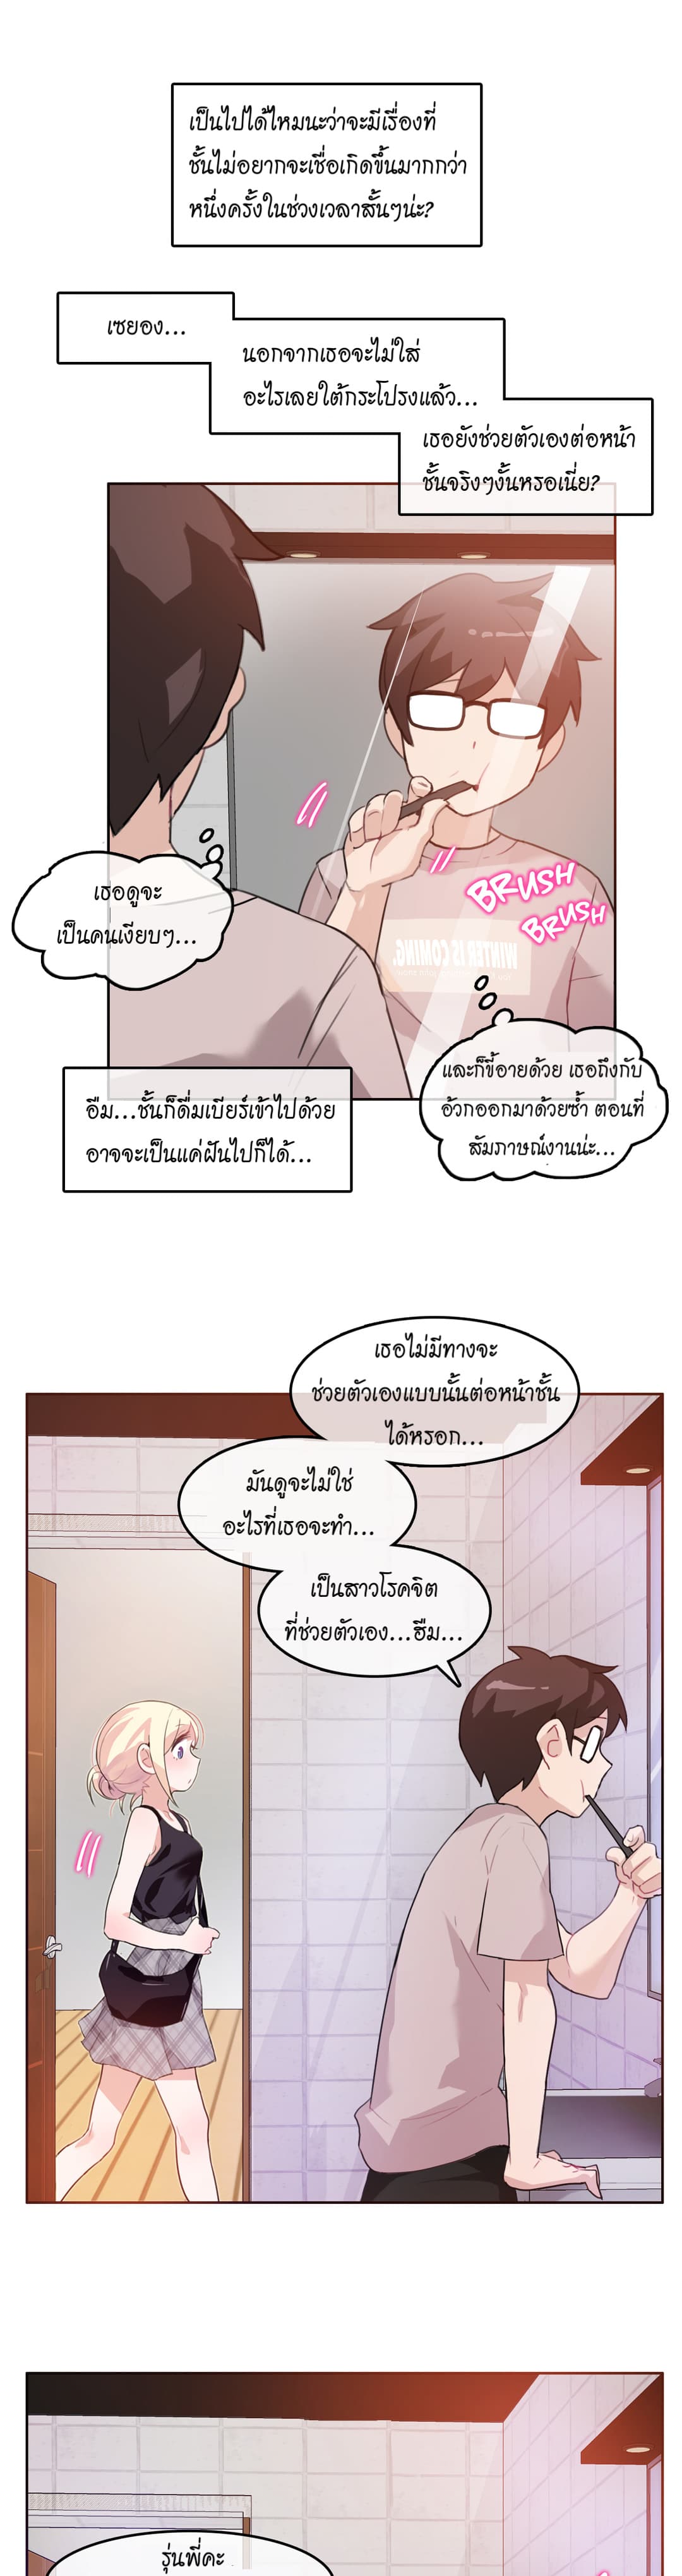 A Pervert’s Daily Life 5 (1)